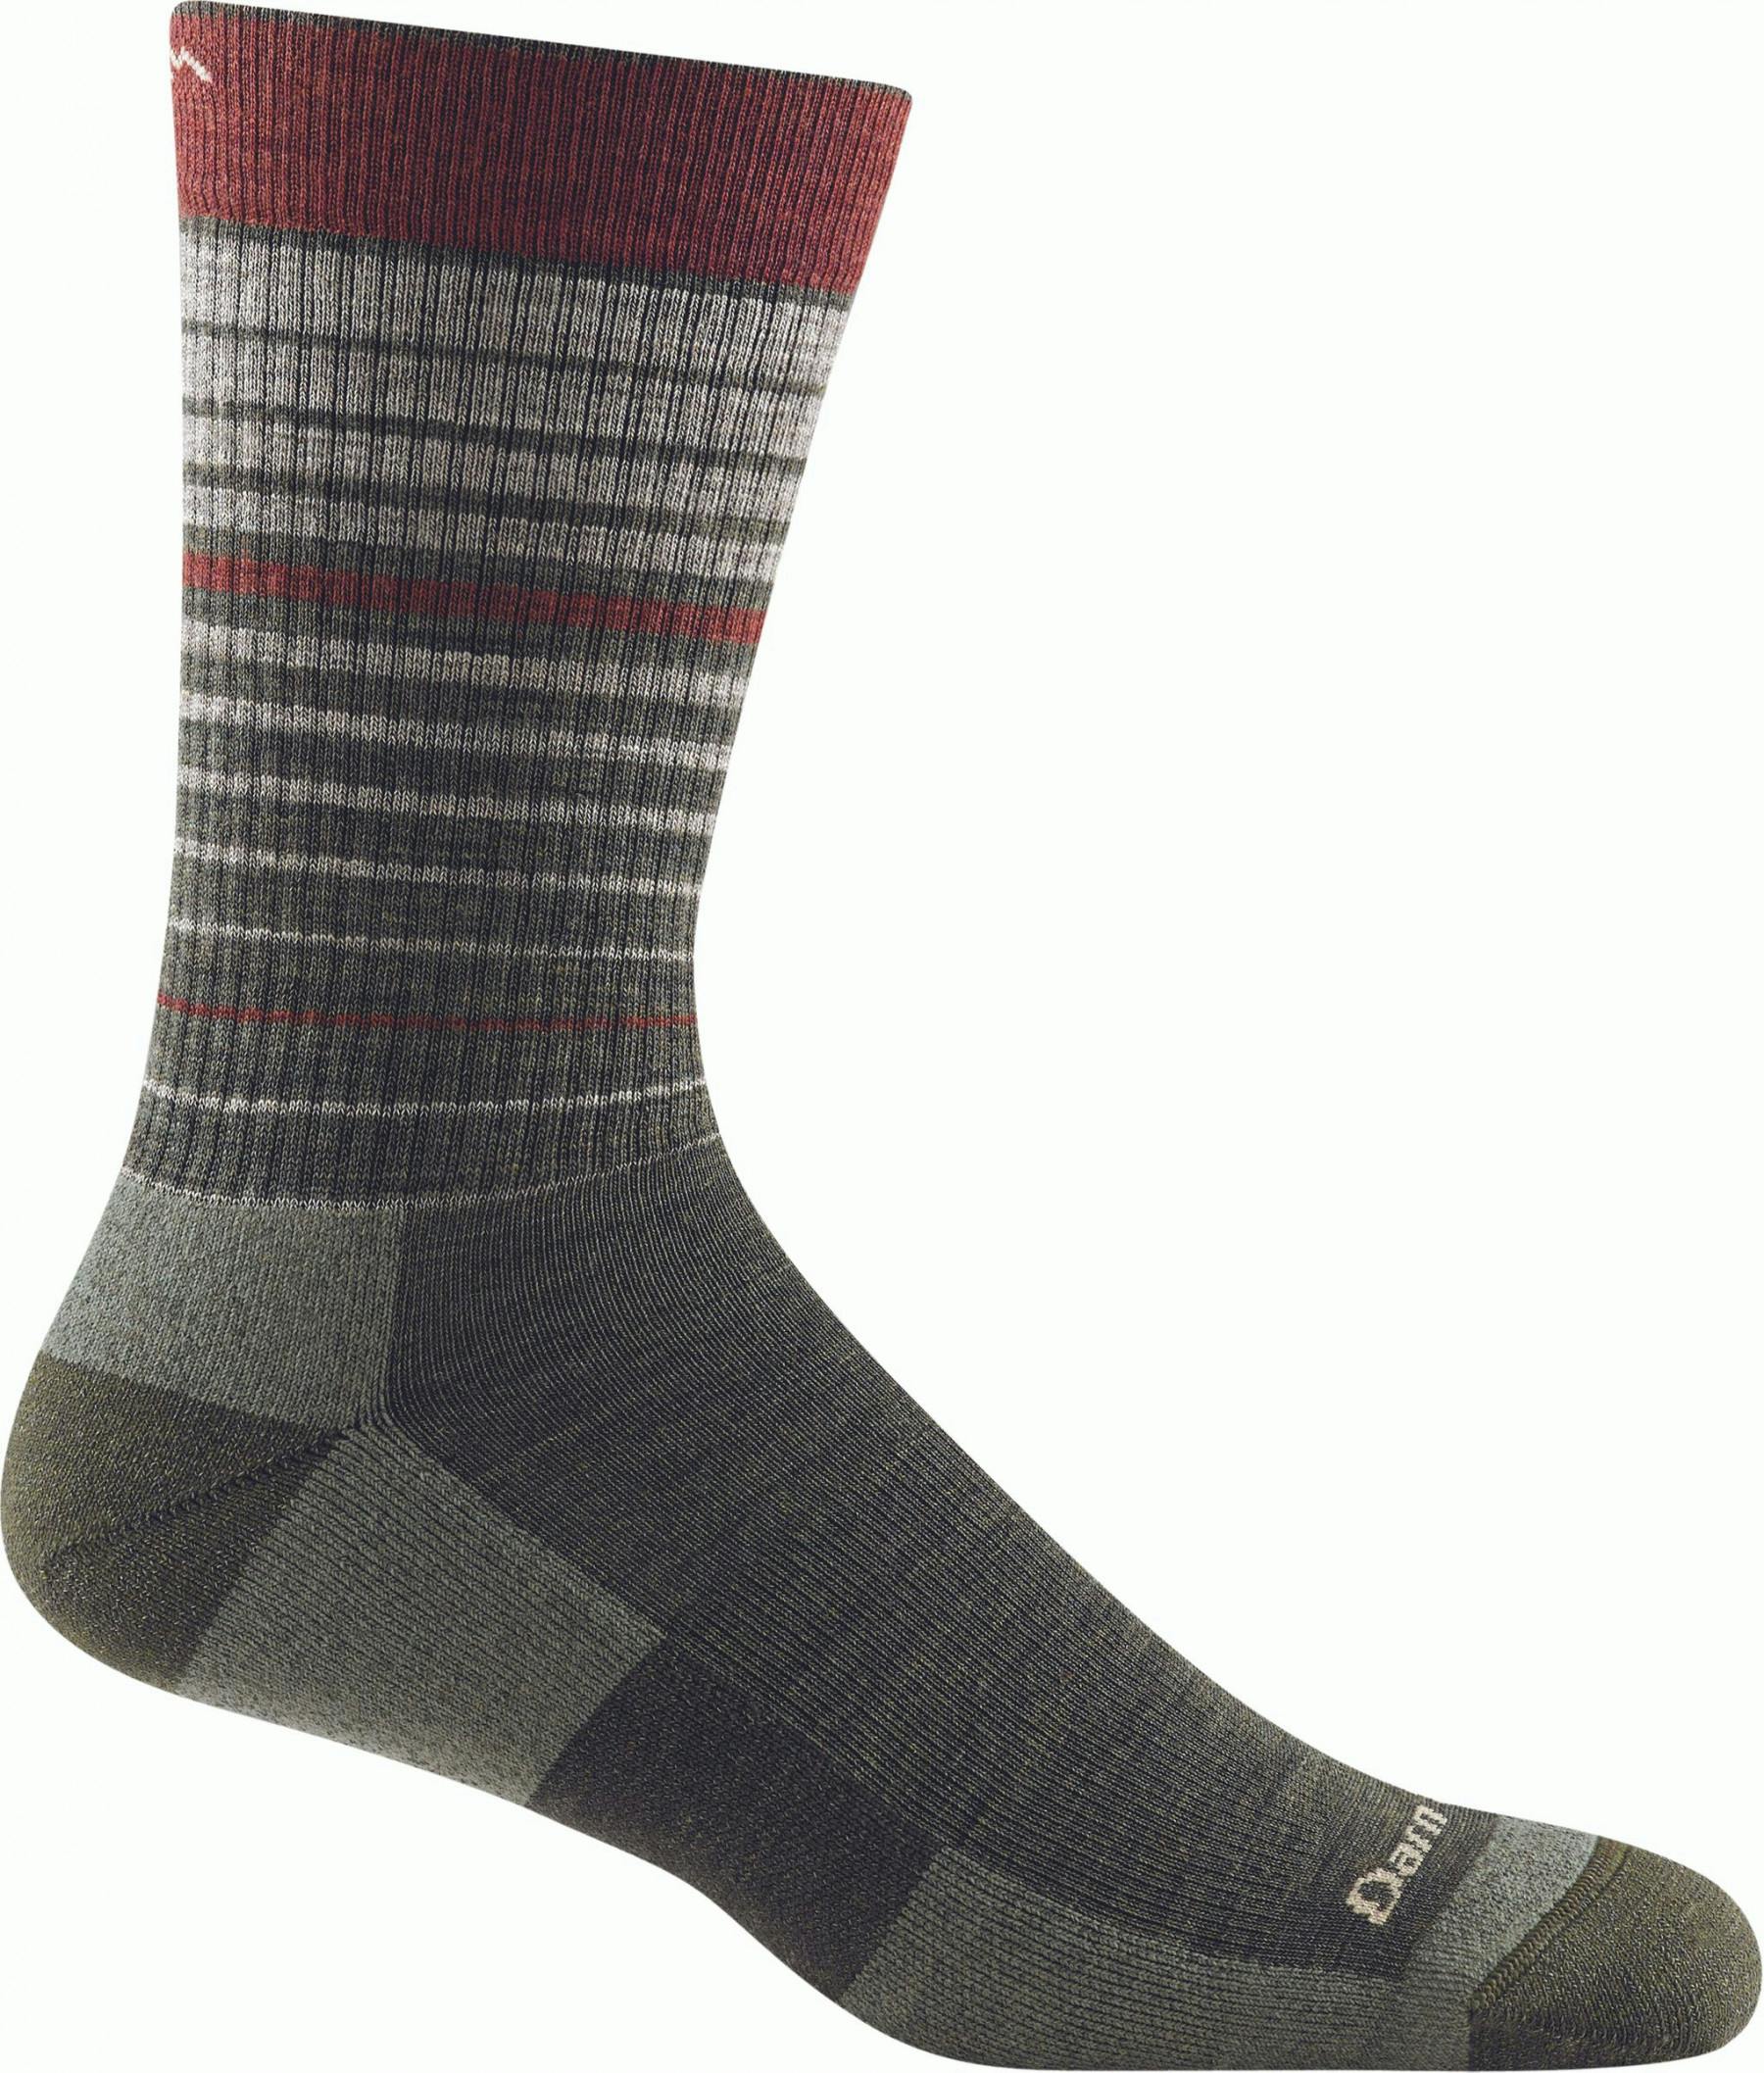 Darn Tough Men's Frequency Crew Lightweight Lifestyle Socks with Cushion